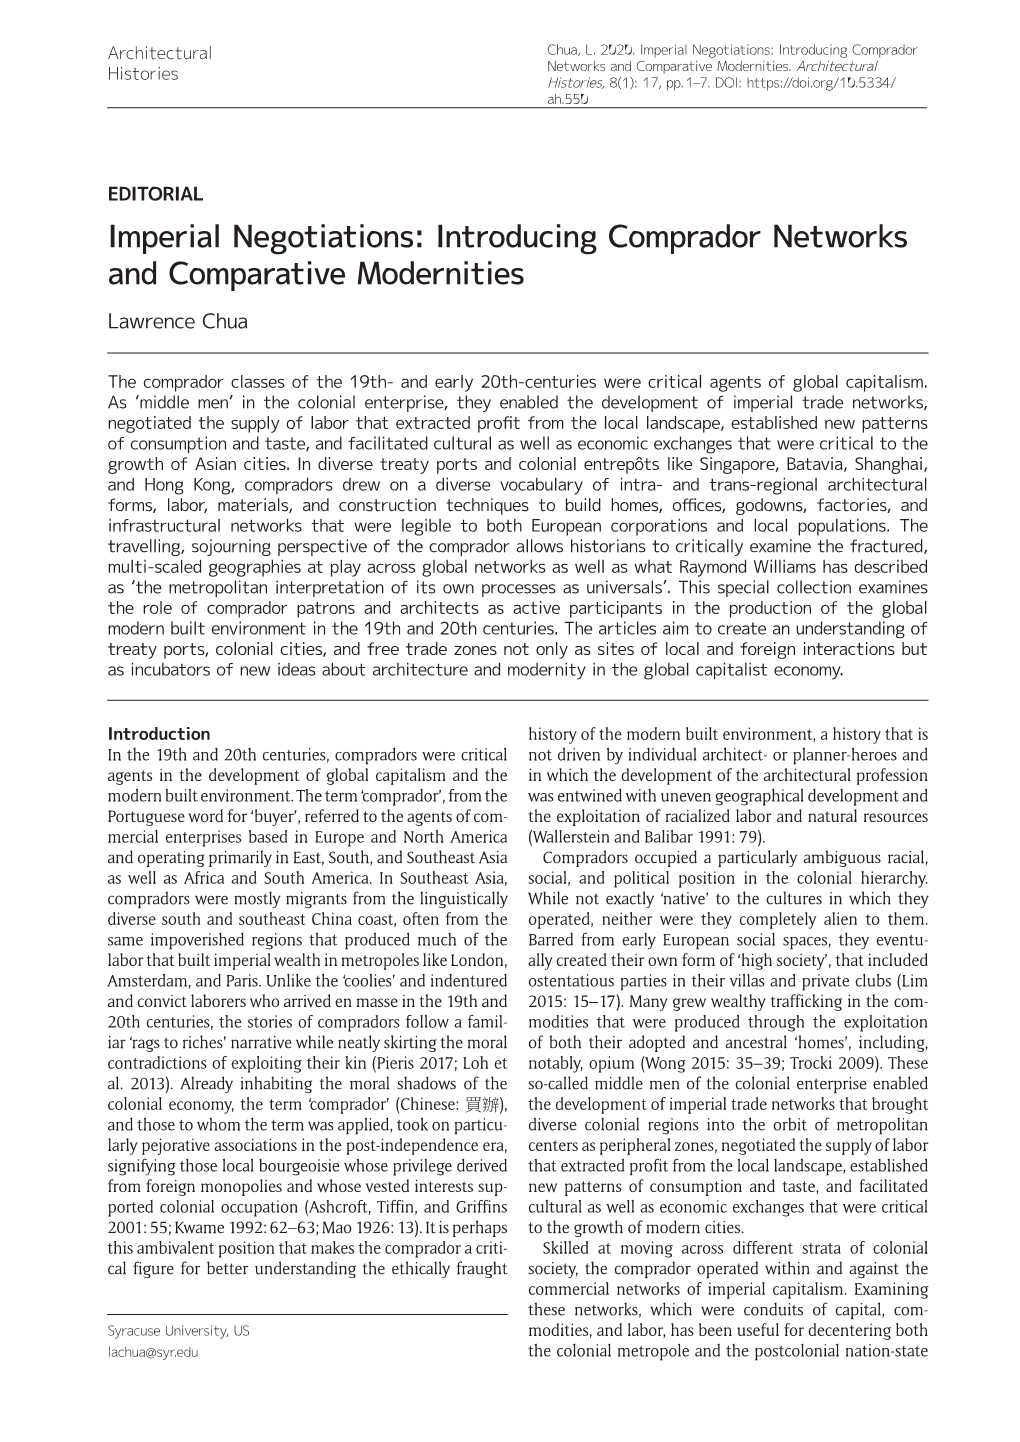 Introducing Comprador Networks and Comparative Modernities